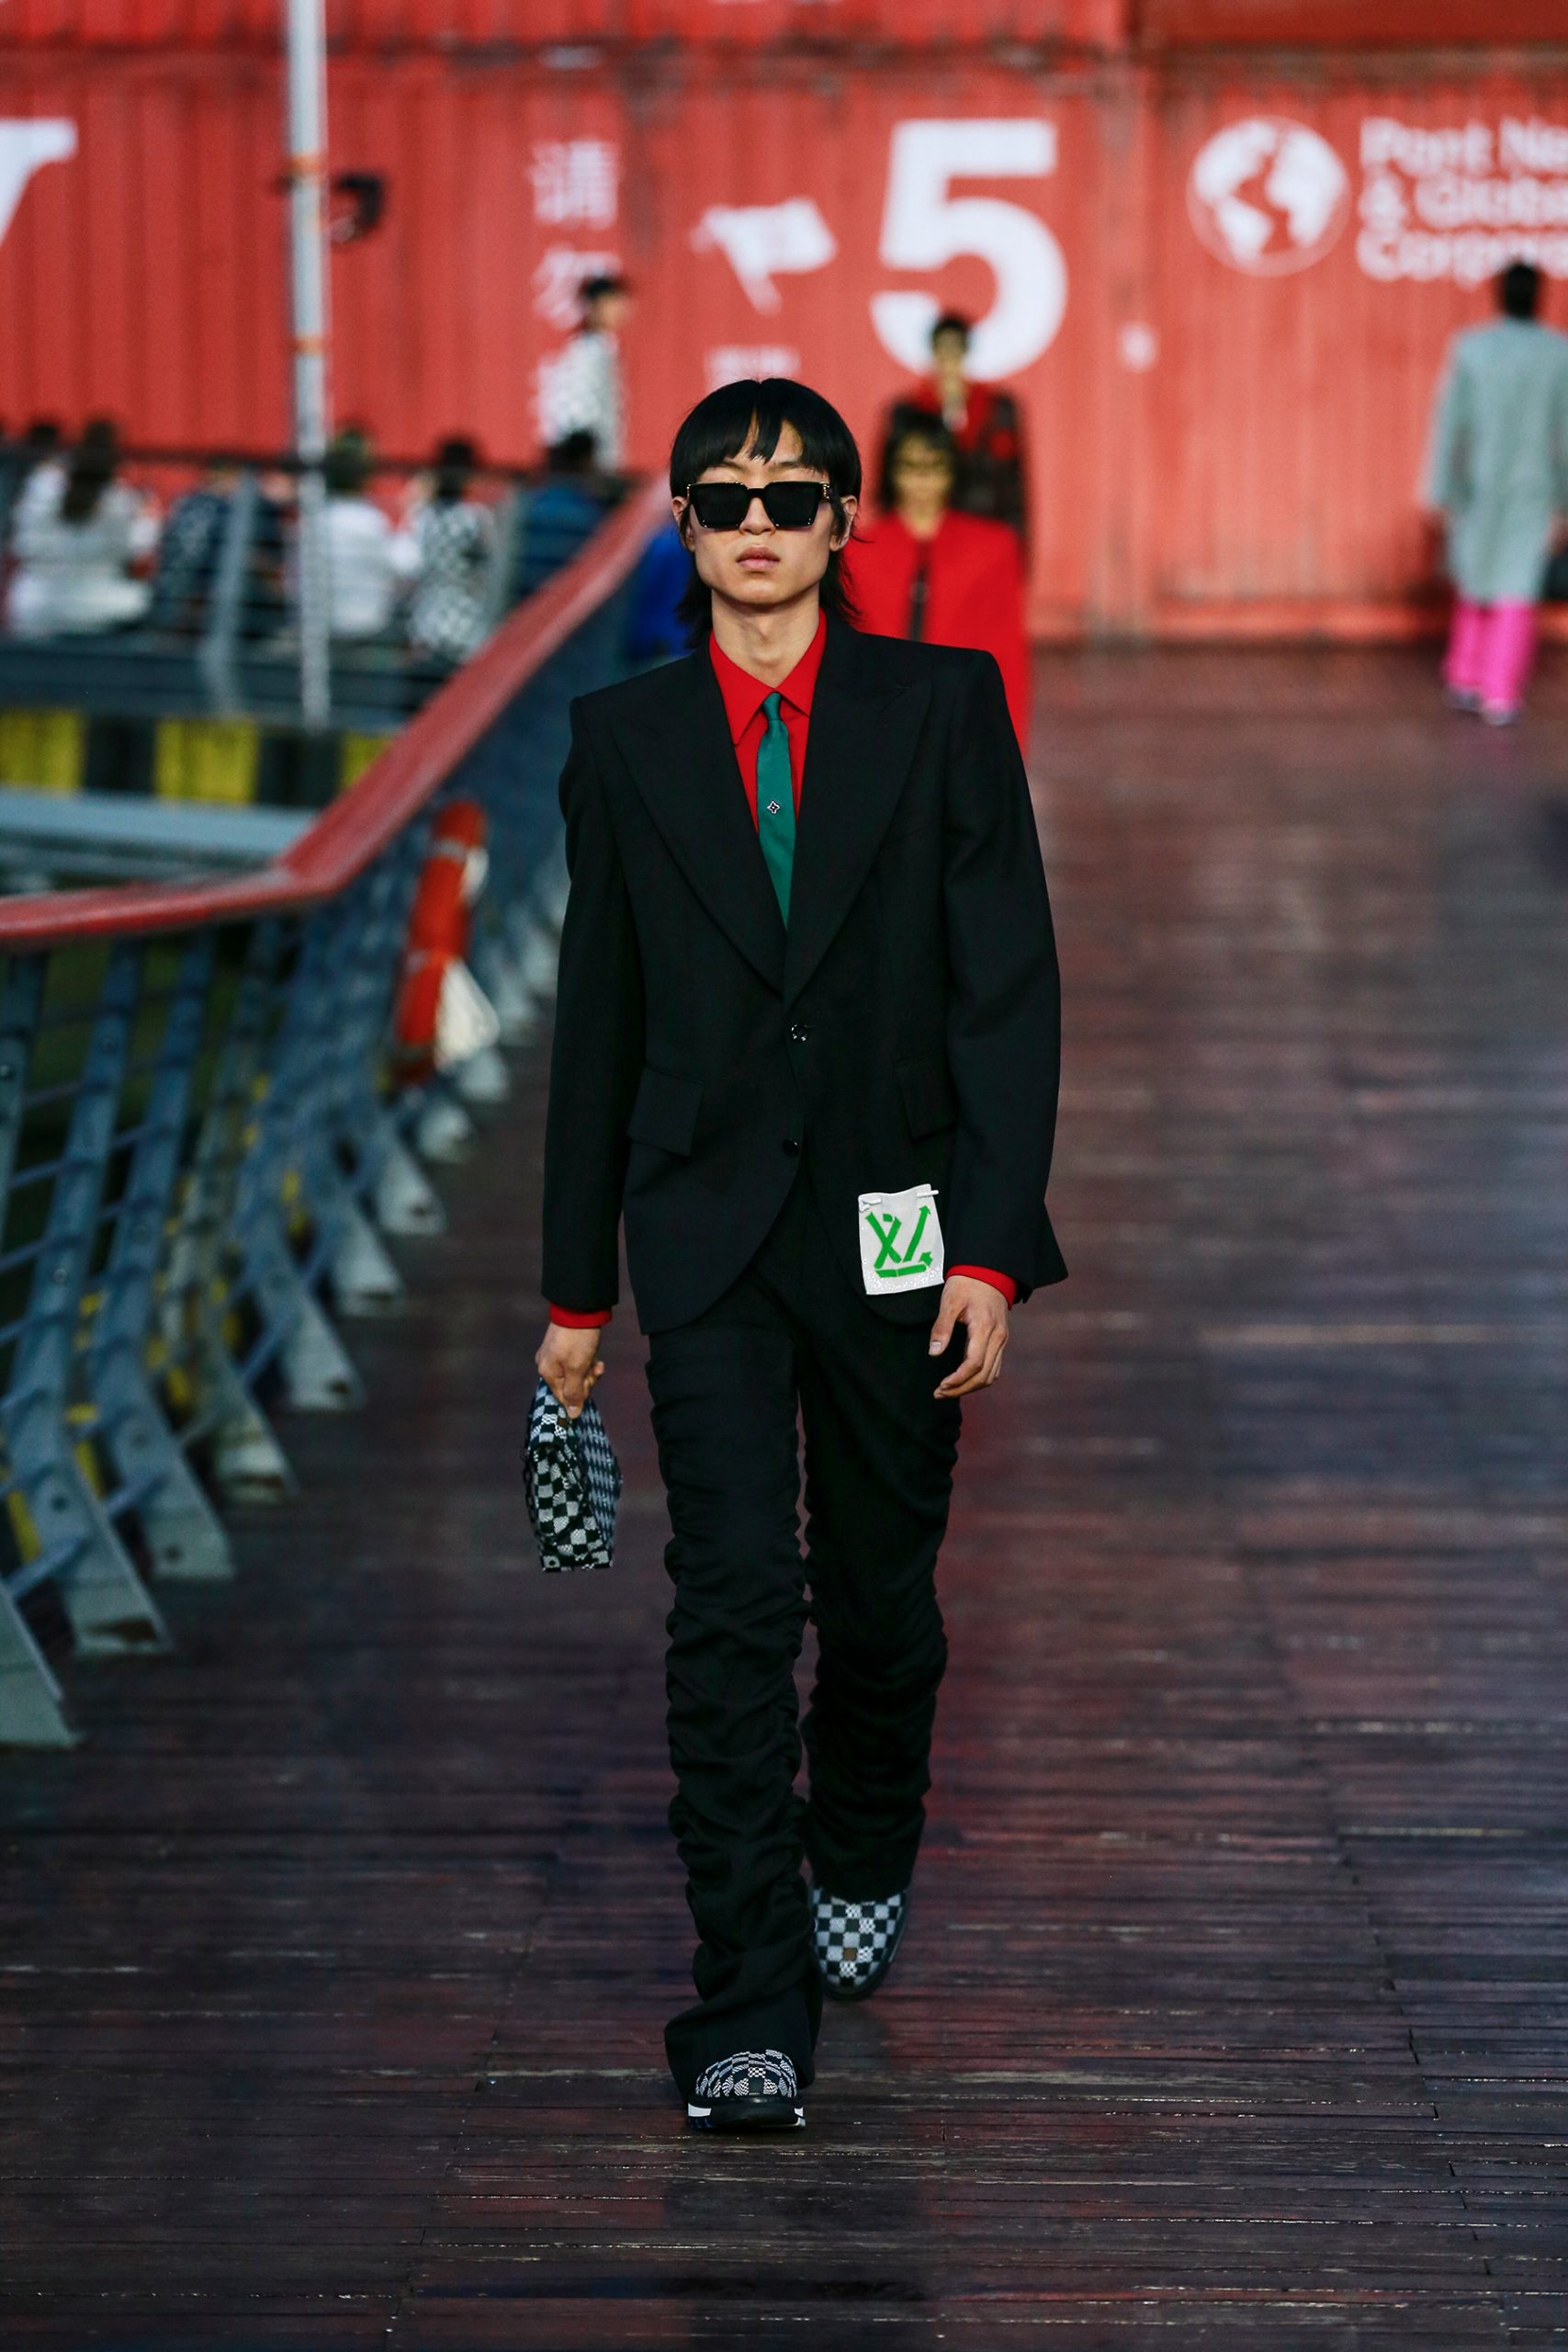 Introducing Louis Vuitton's Spring-Summer 2021 Men's collection by